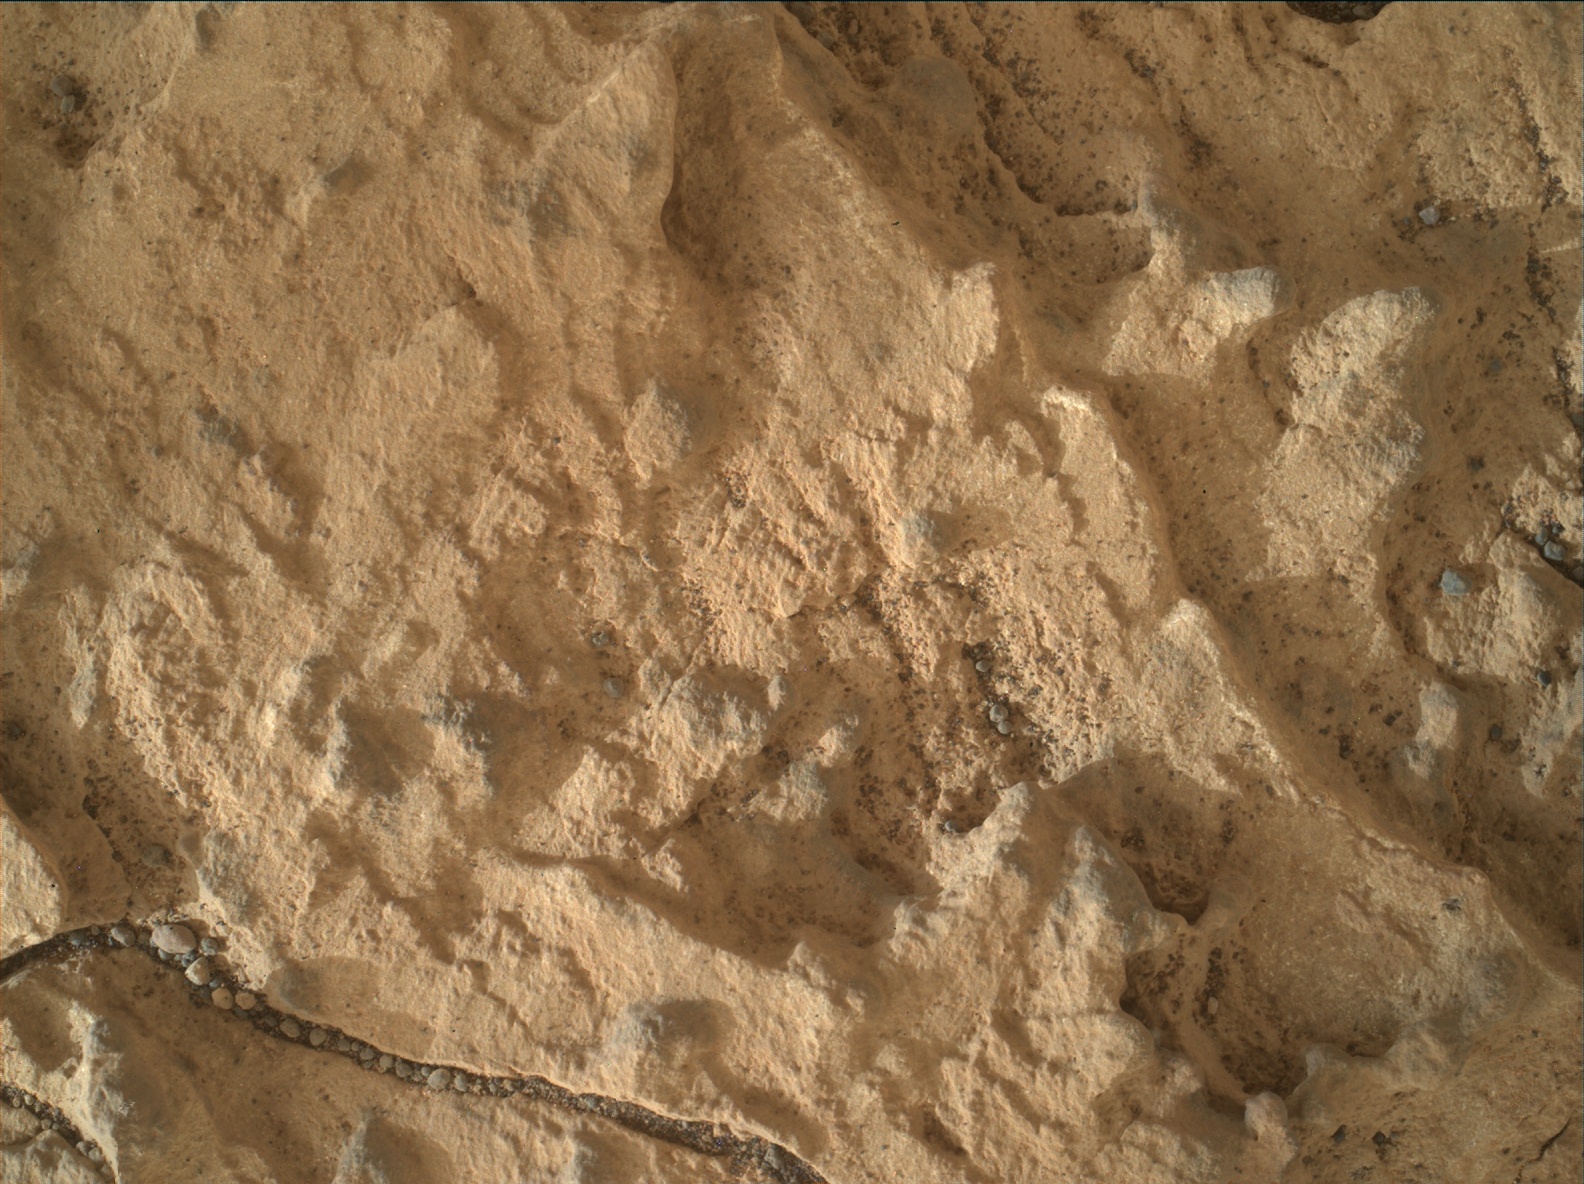 Nasa's Mars rover Curiosity acquired this image using its Mars Hand Lens Imager (MAHLI) on Sol 1682